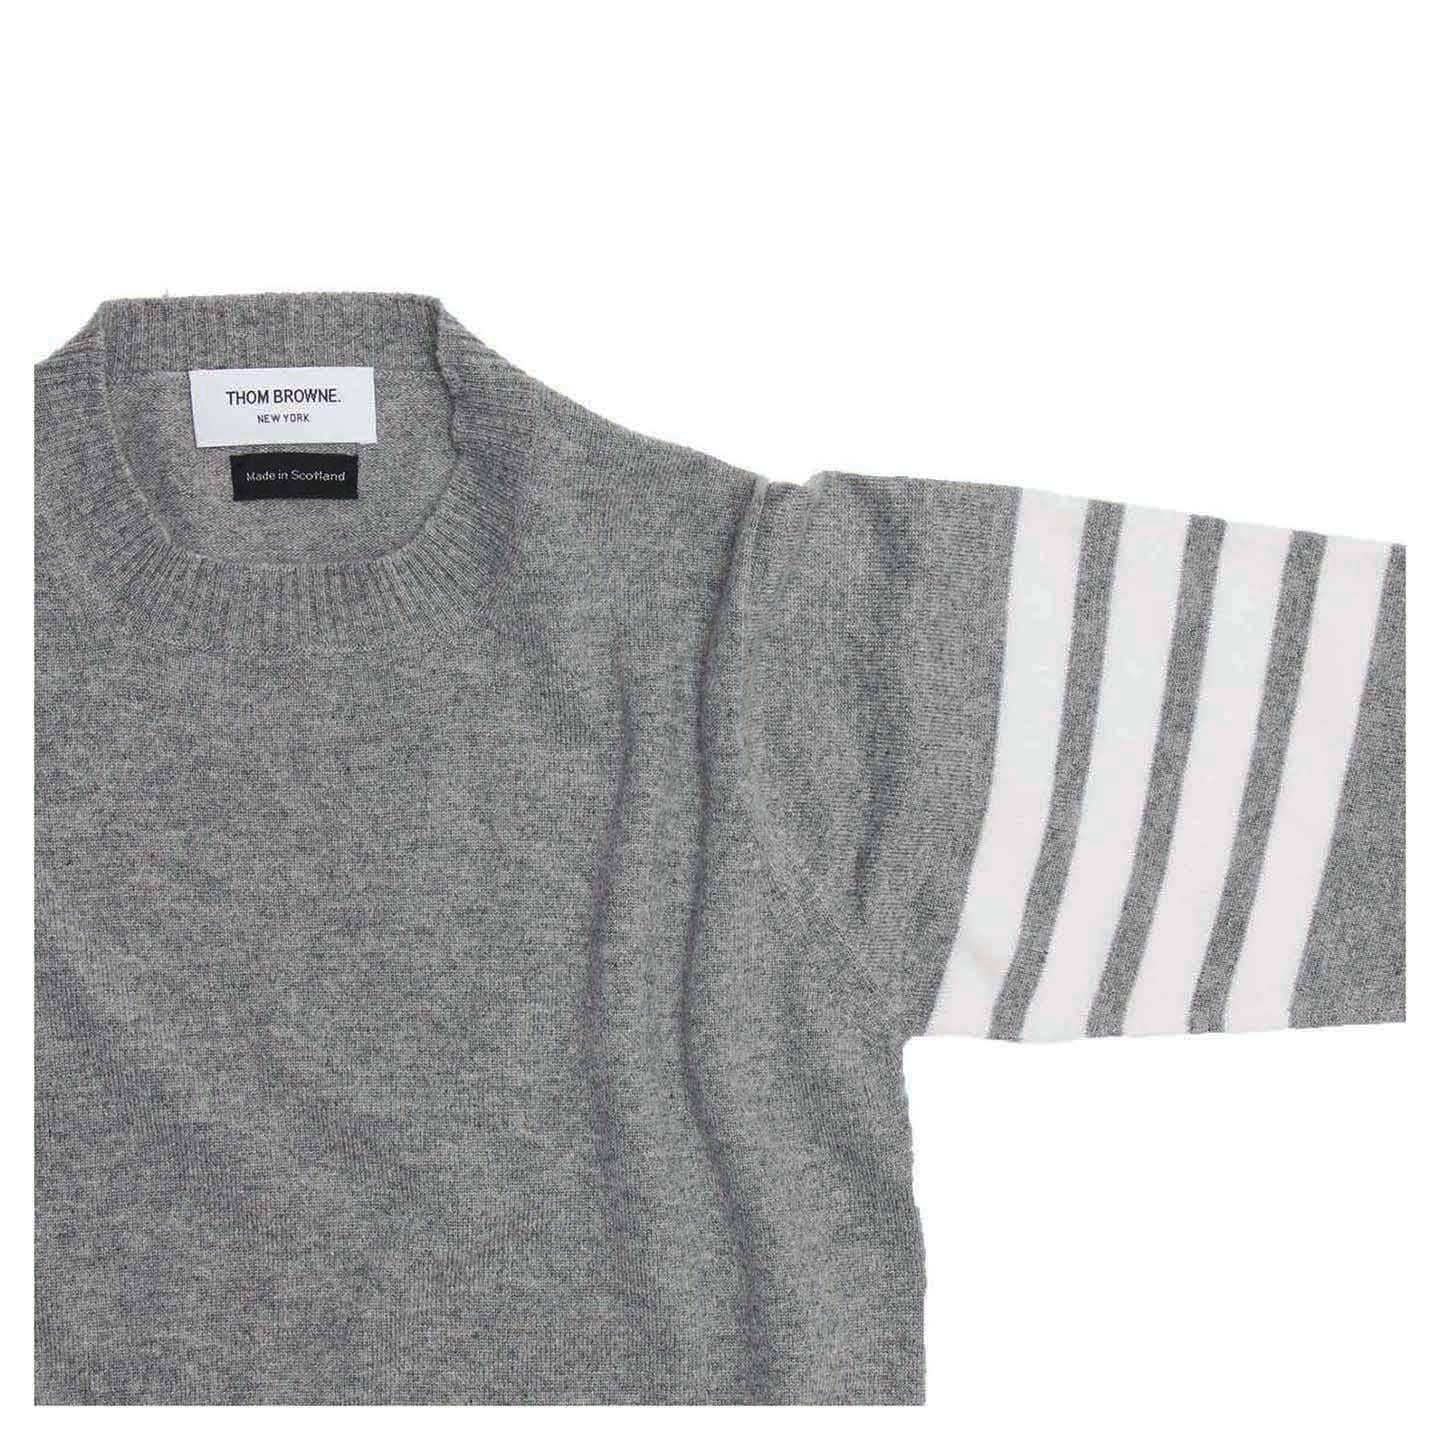 Thom Browne Grey Cashmere Crew Neck Pullover In Excellent Condition For Sale In Brooklyn, NY